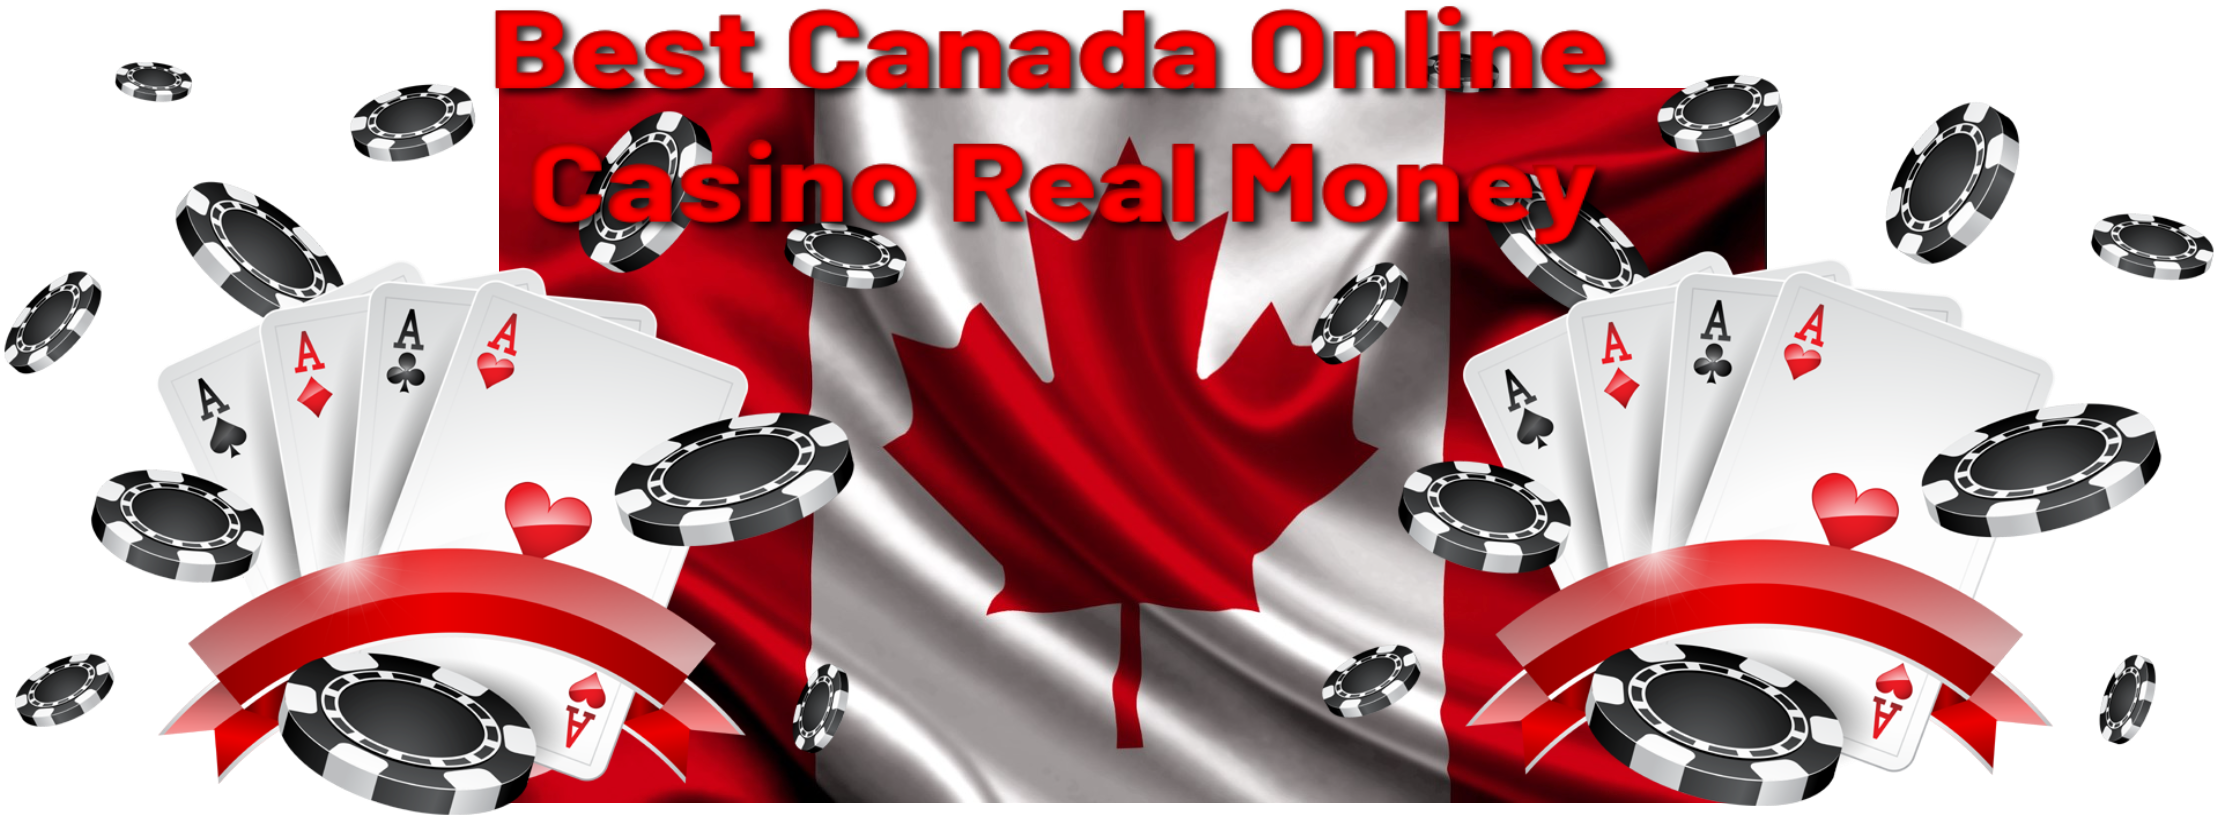 5 Surefire Ways online casinos in Canada Will Drive Your Business Into The Ground